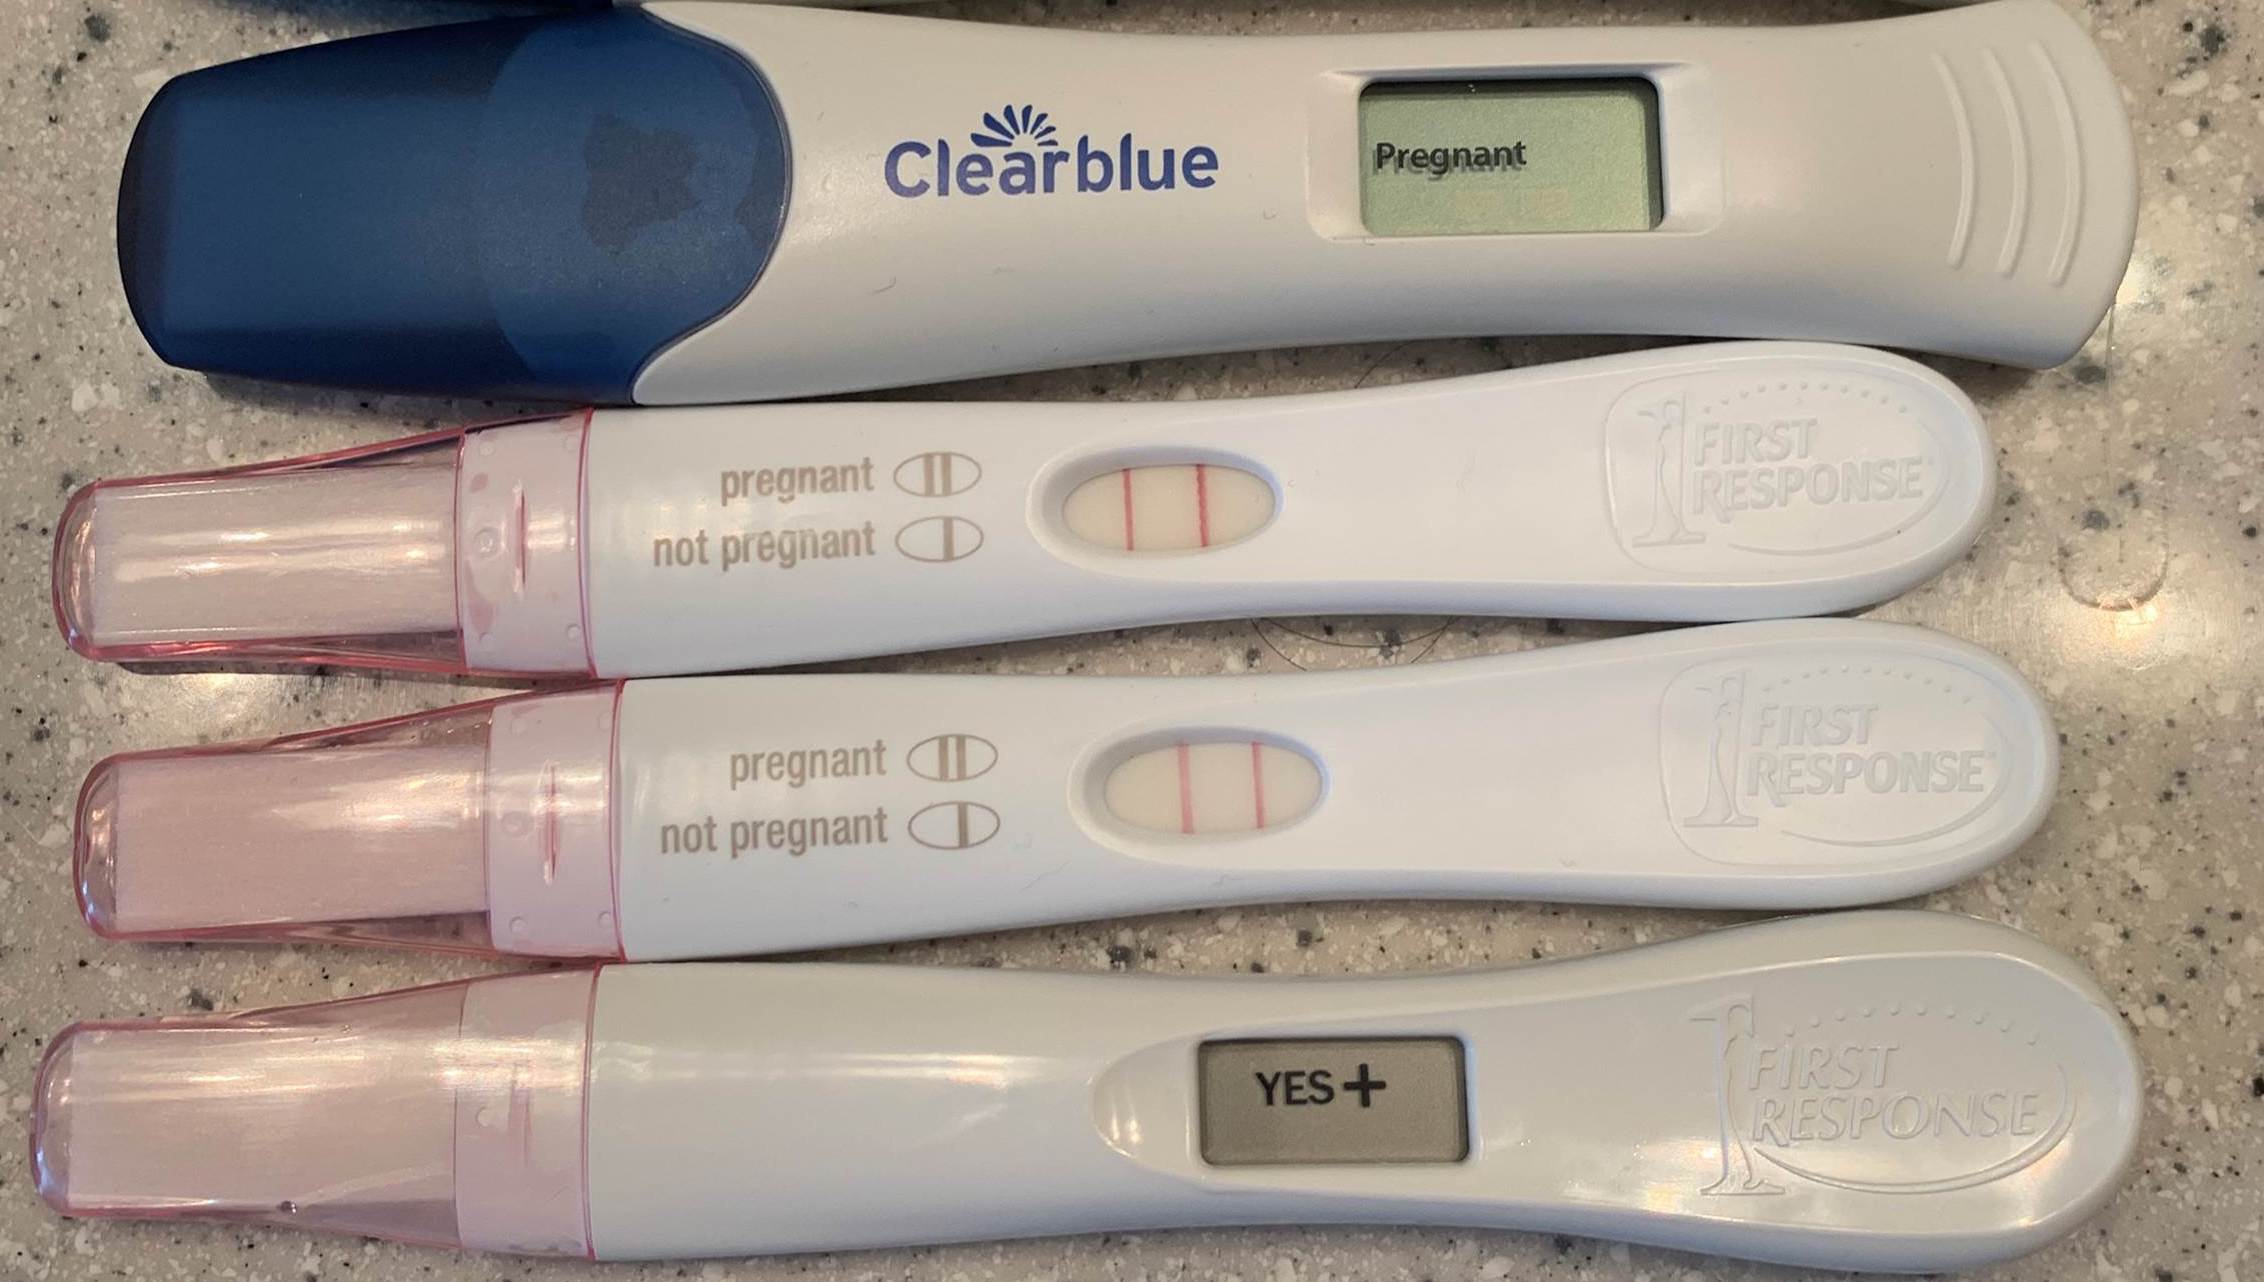 Evaporation, Indent, and Faint Lines: Making Sense of Pregnancy Tests